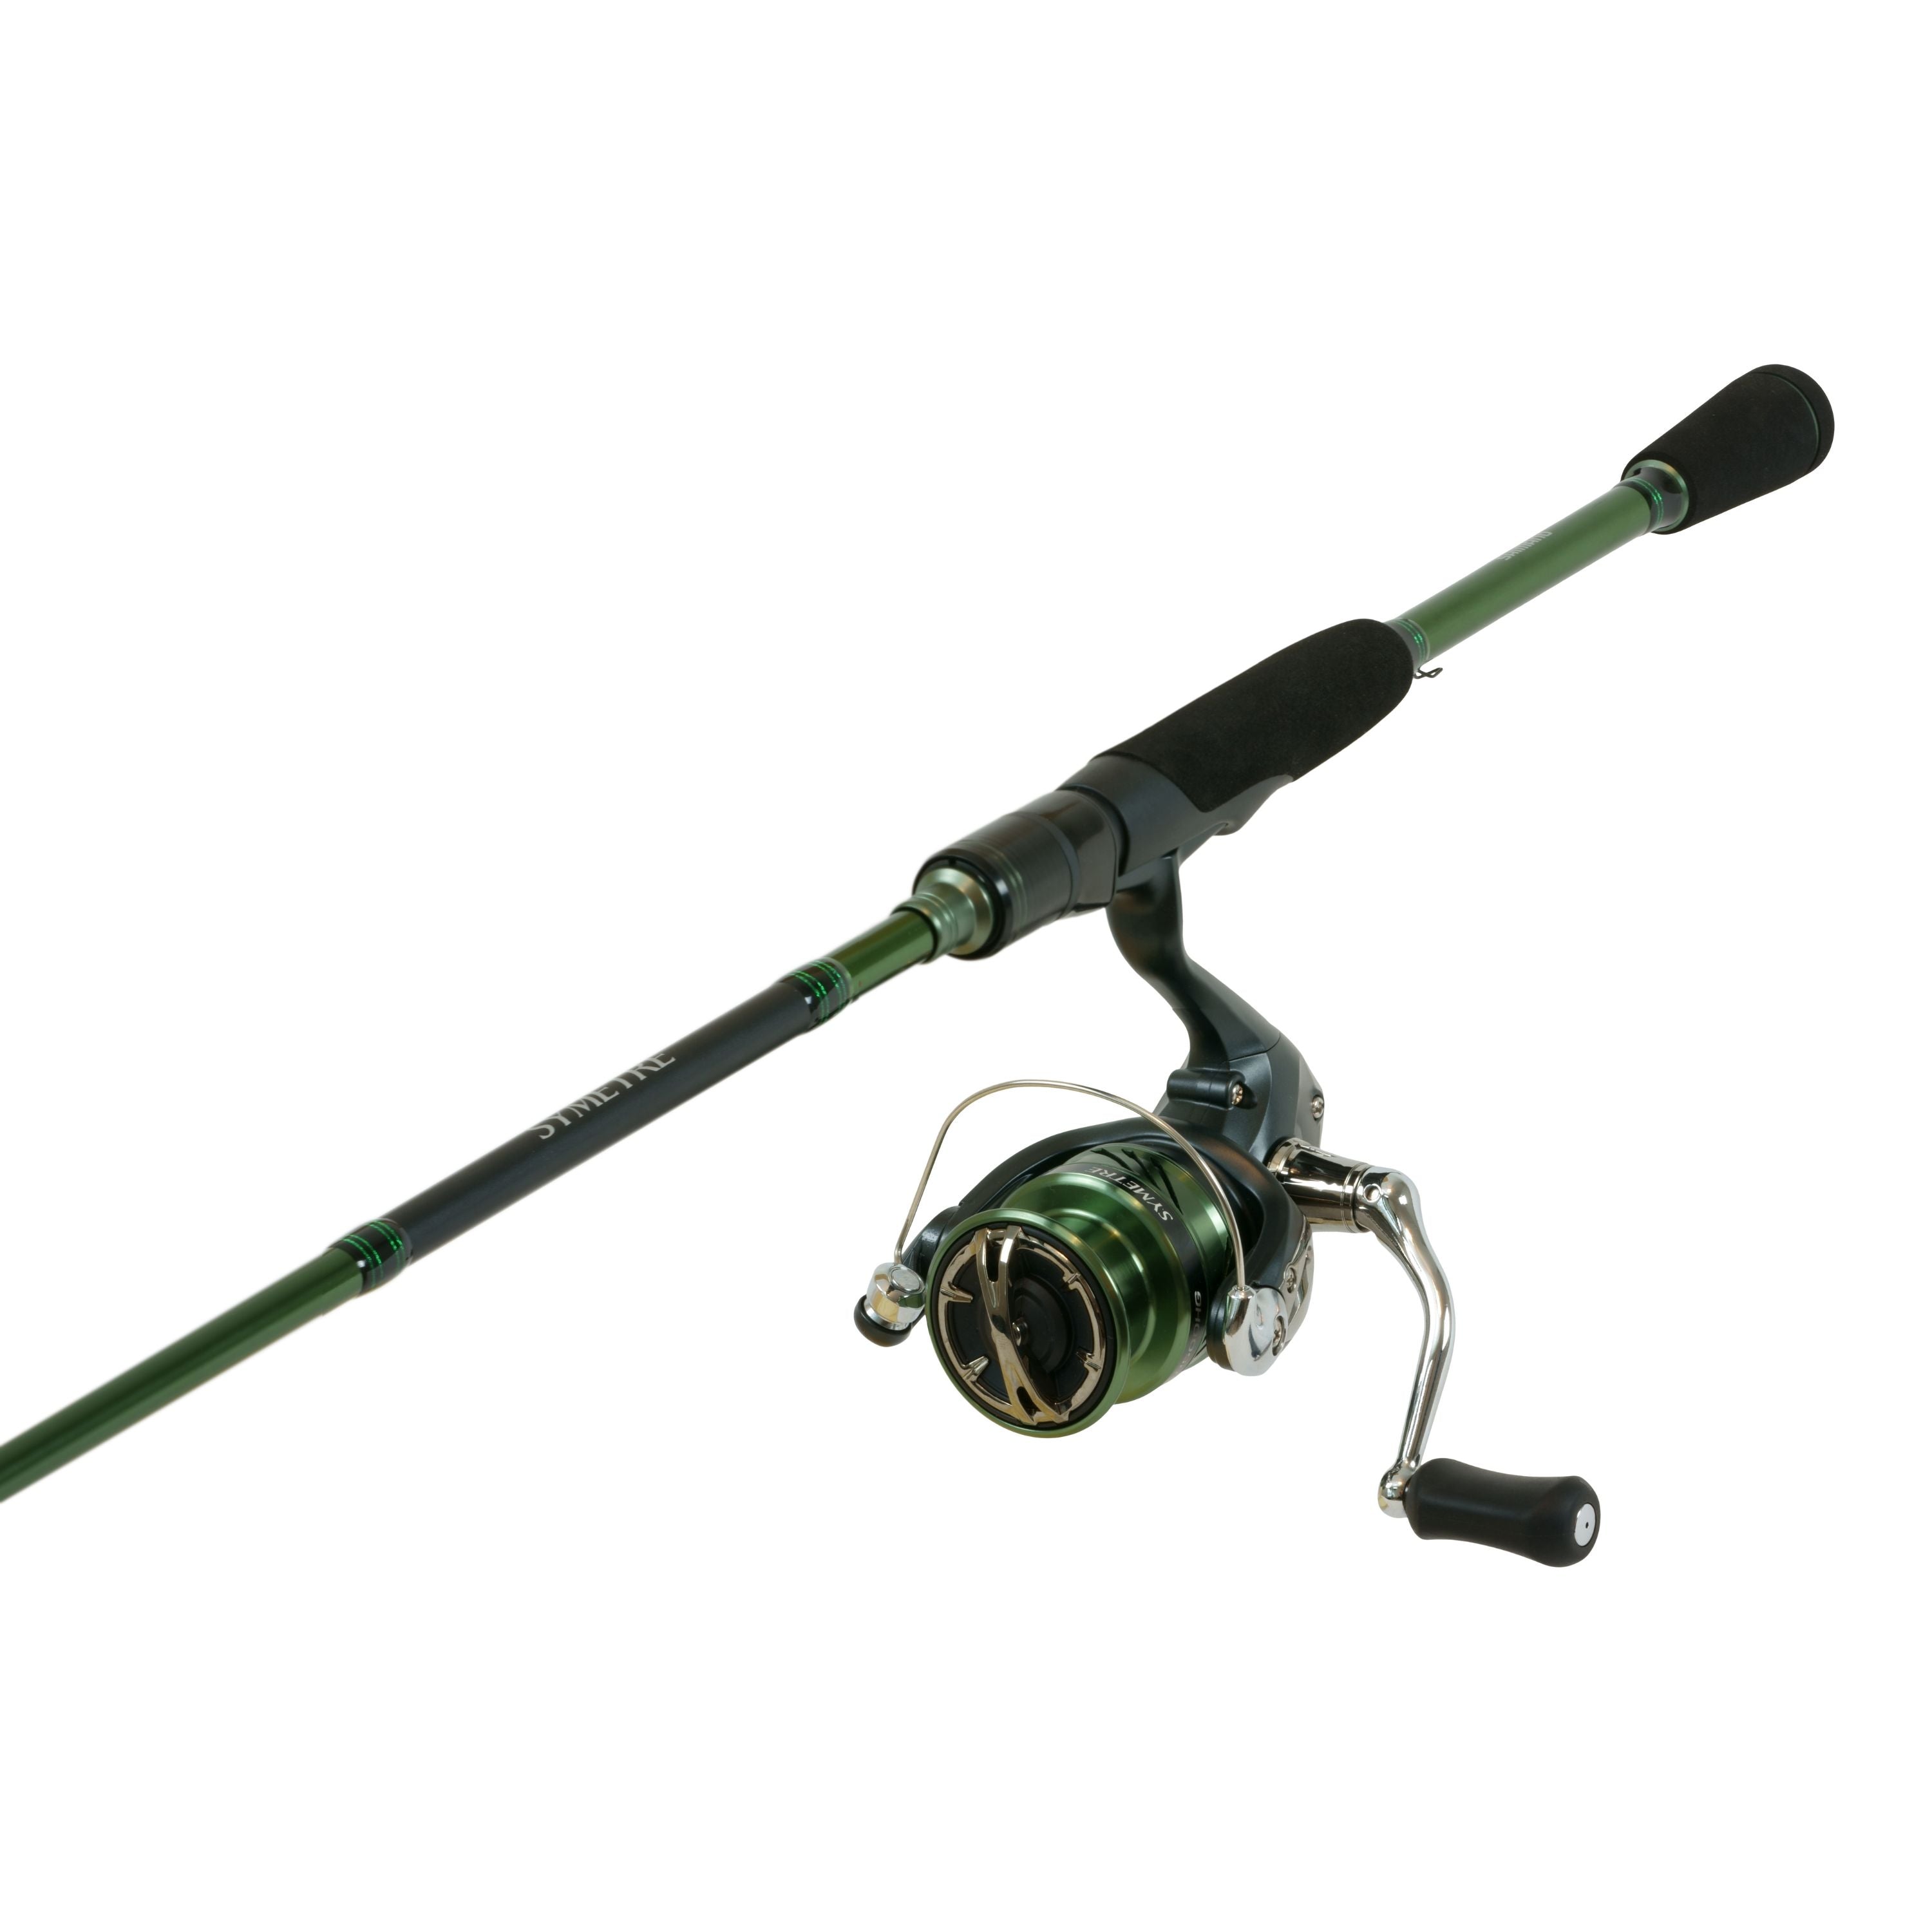 Symetre Spinning combo 2500 reel